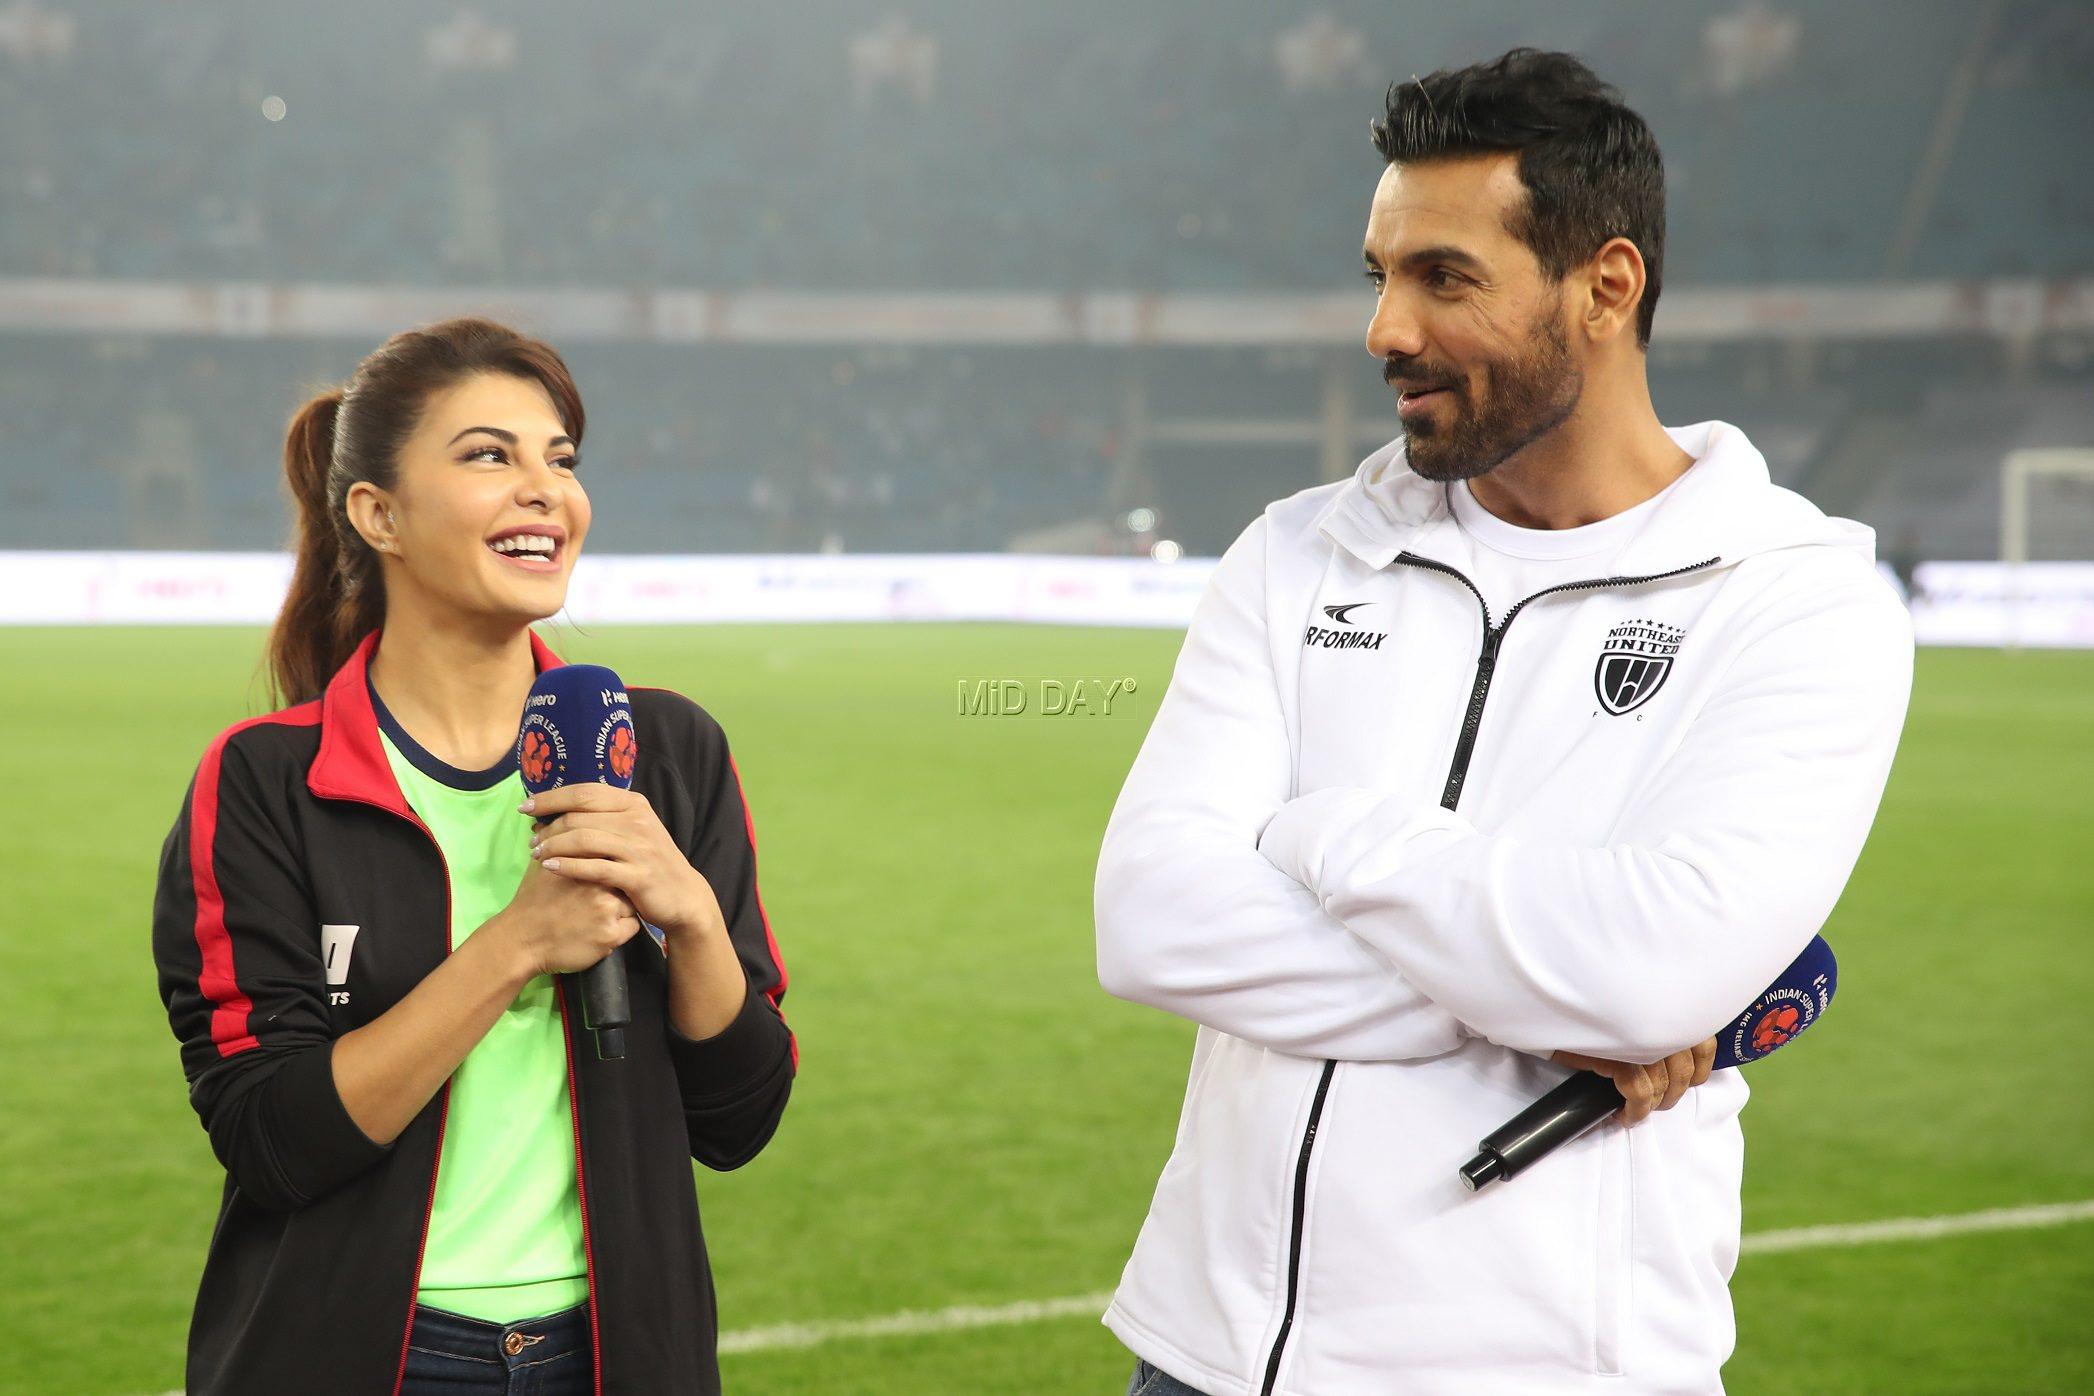 Jacqueline Fernandez and John Abraham share a light moment during the ISL match